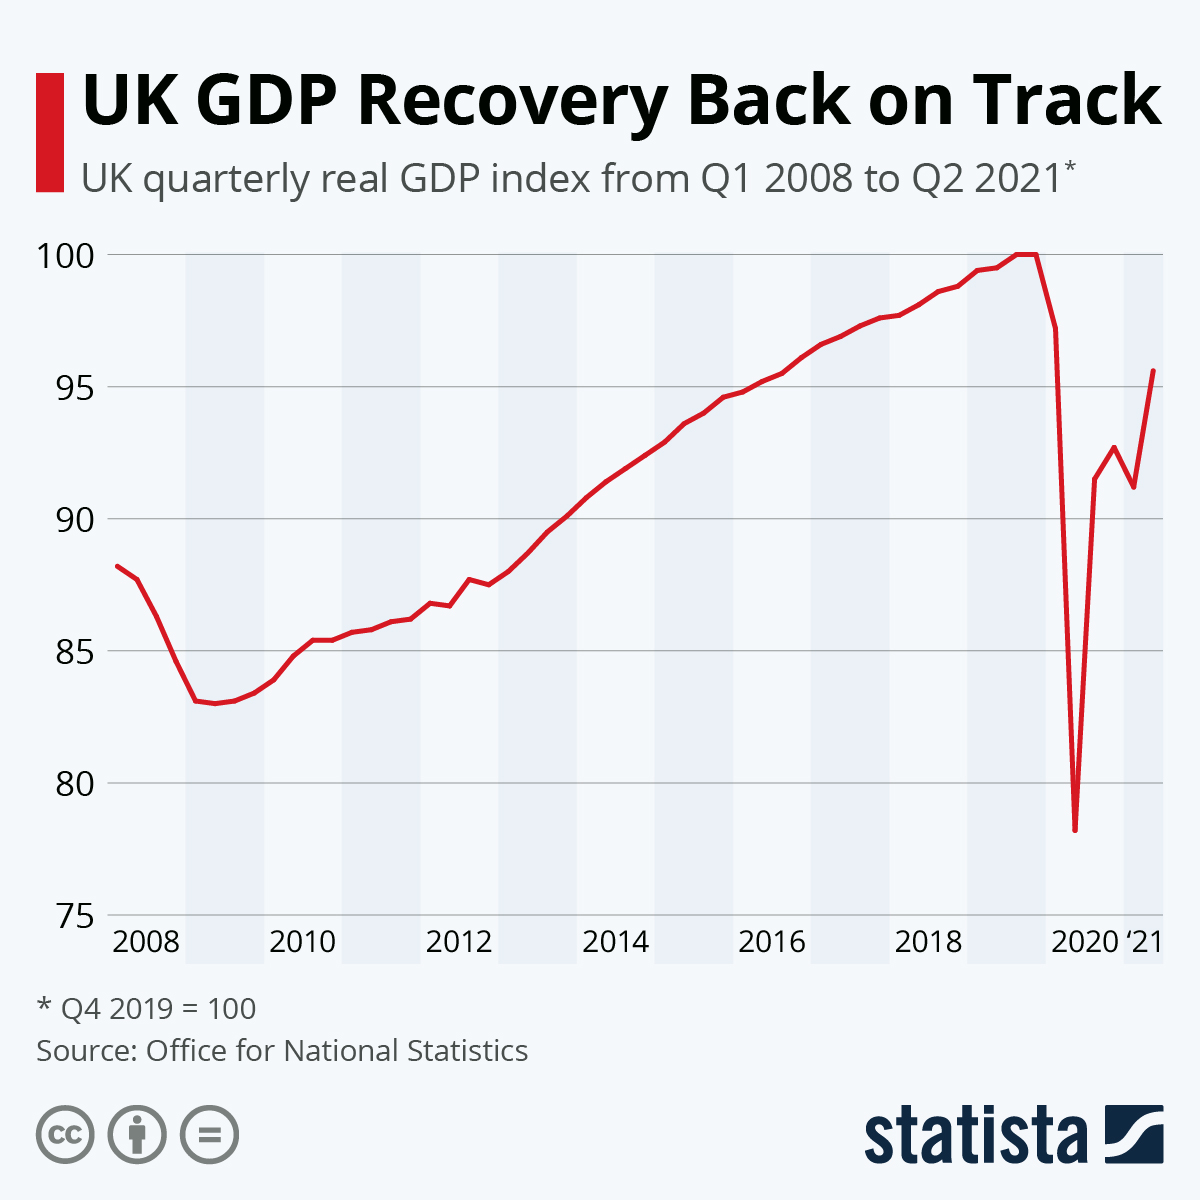 UK GDP Recovery Back on Track